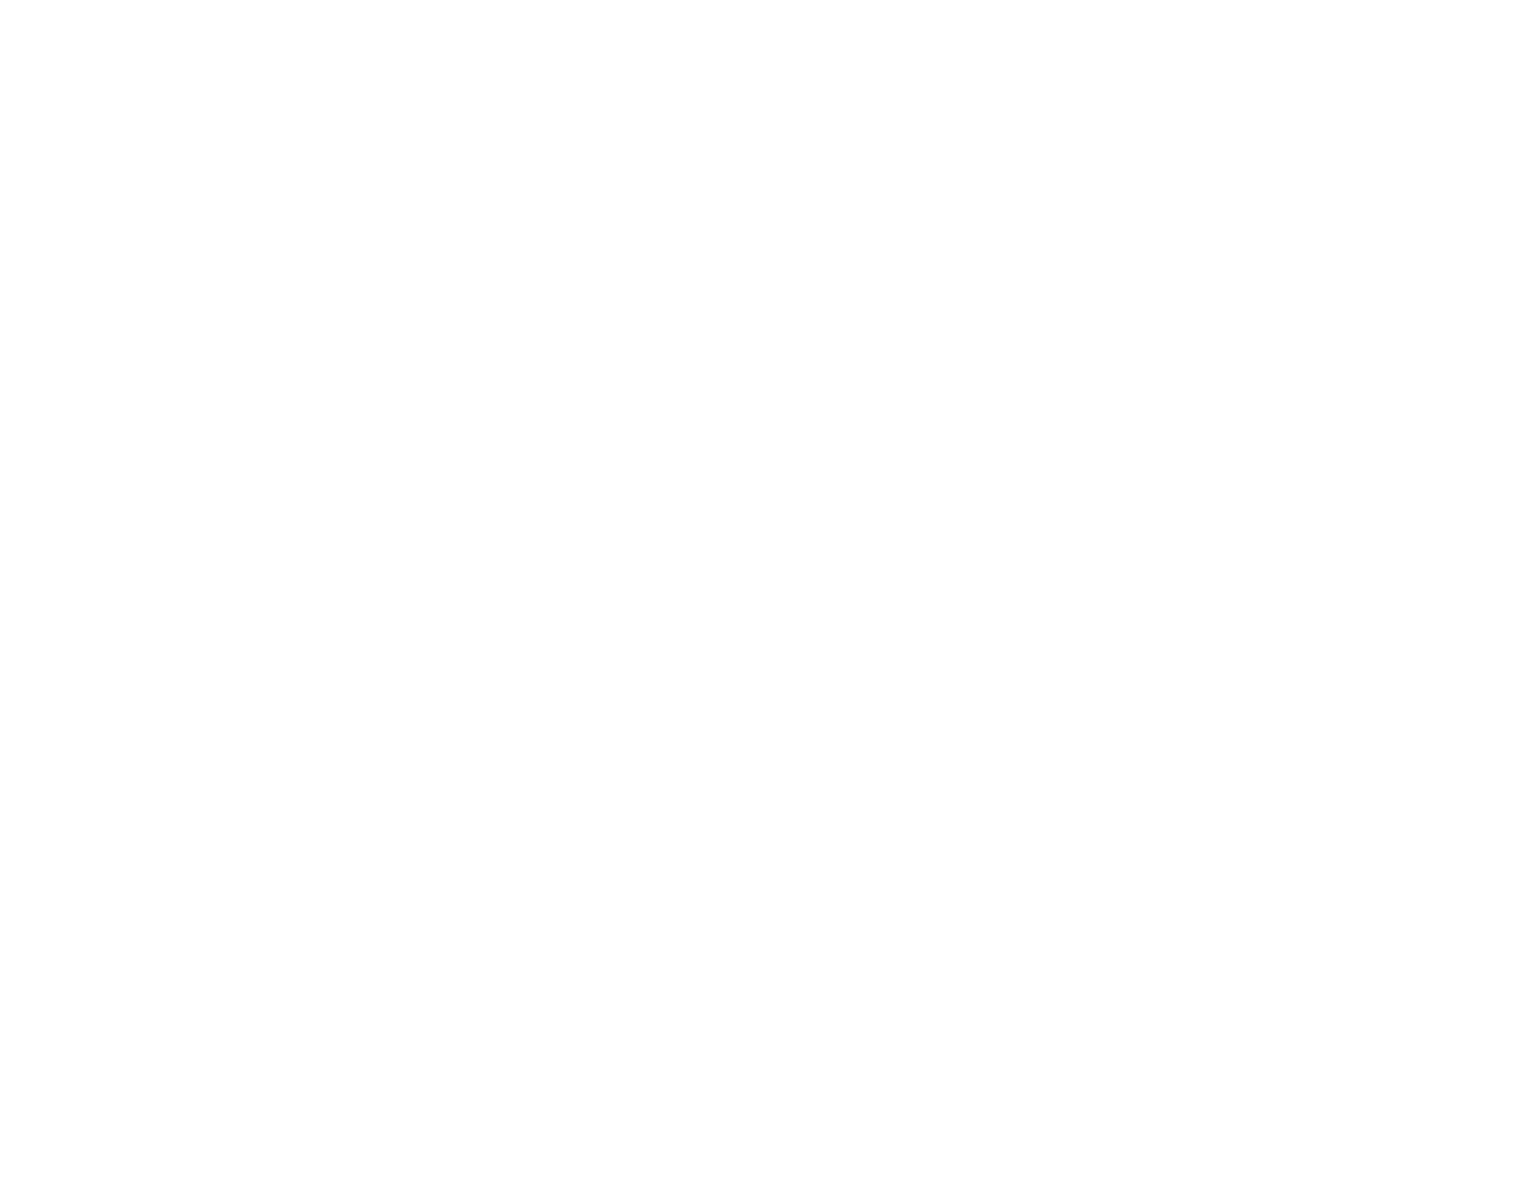 Vienna Airport logo for dark backgrounds (transparent PNG)